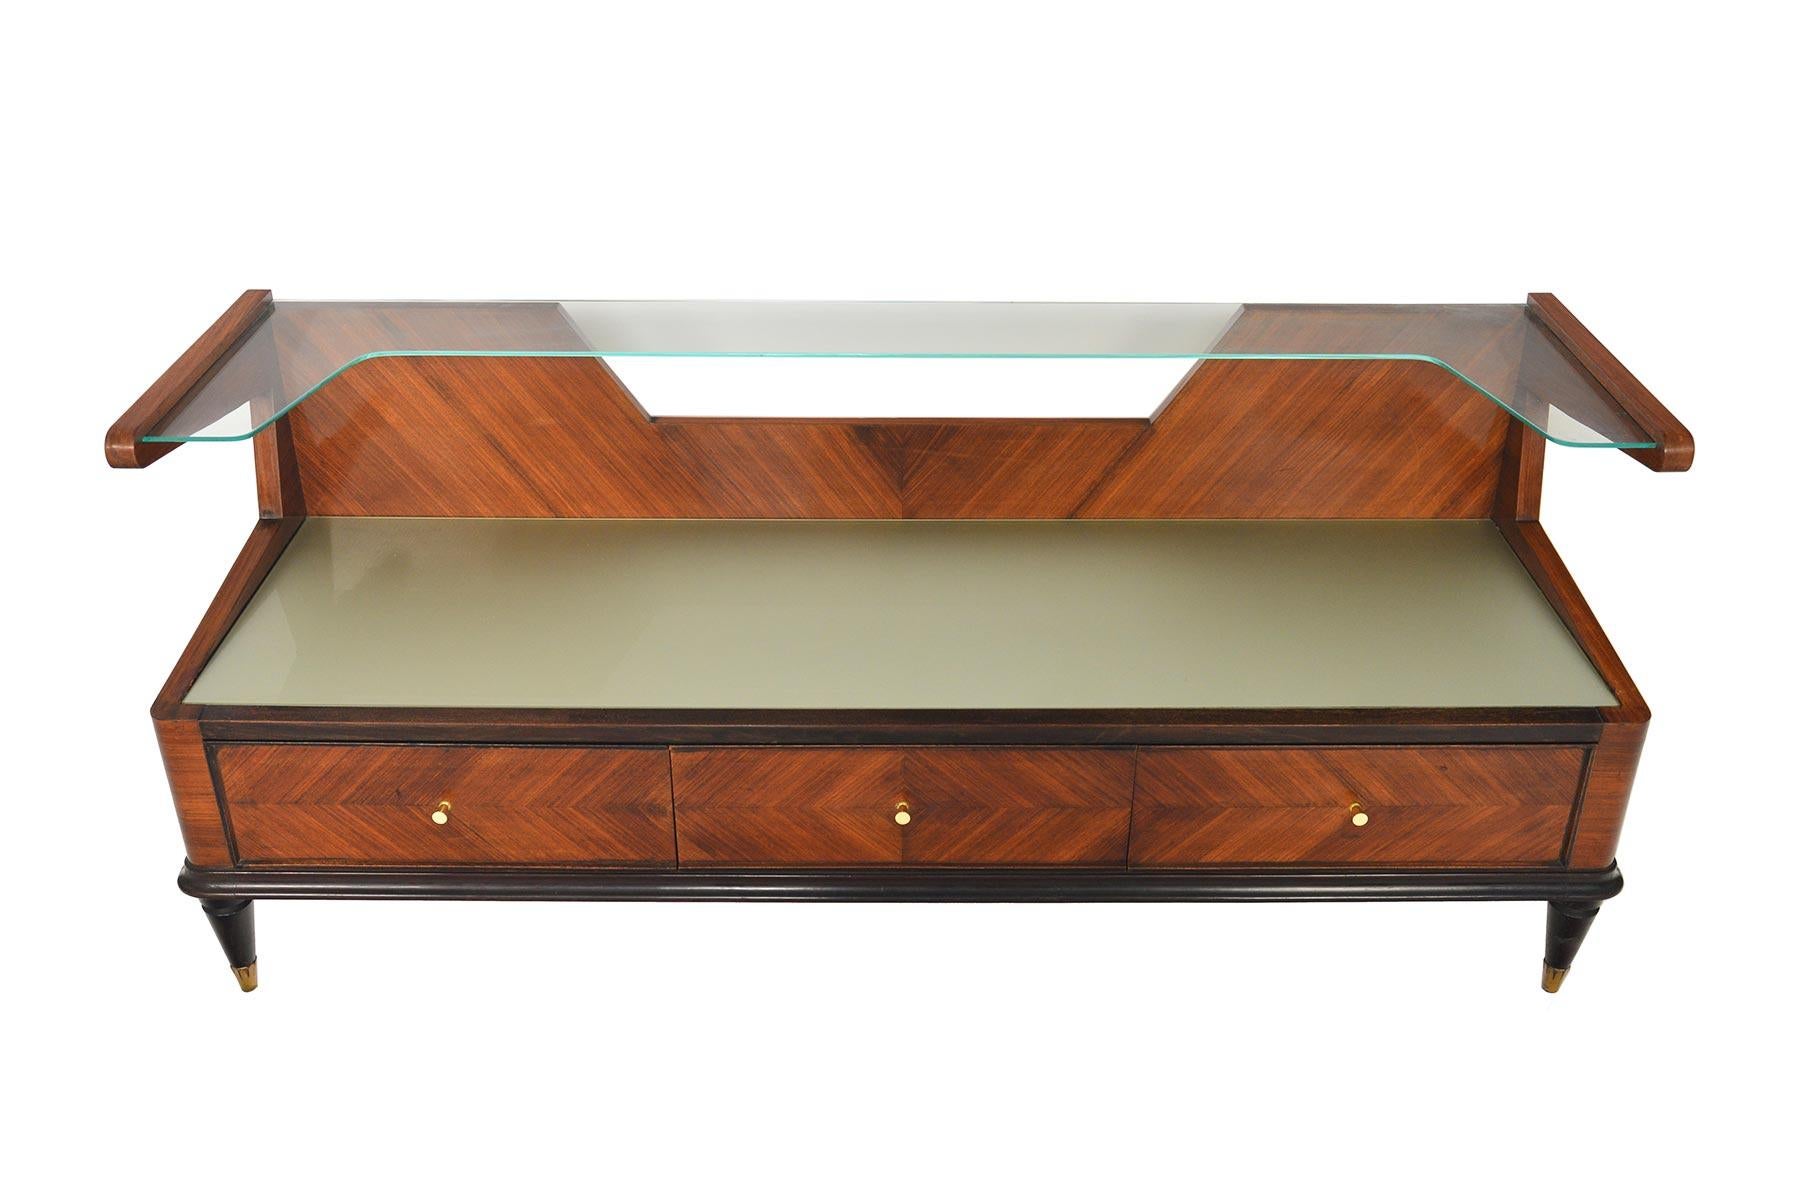 This astounding Italian Mid-Century Modern console credenza offers a streamline silhouette with traditional detailing. The two-tier design features a glass shelf and a frosted glass- lined top. Diamond inlayed rosewood offers stunning symmetry.